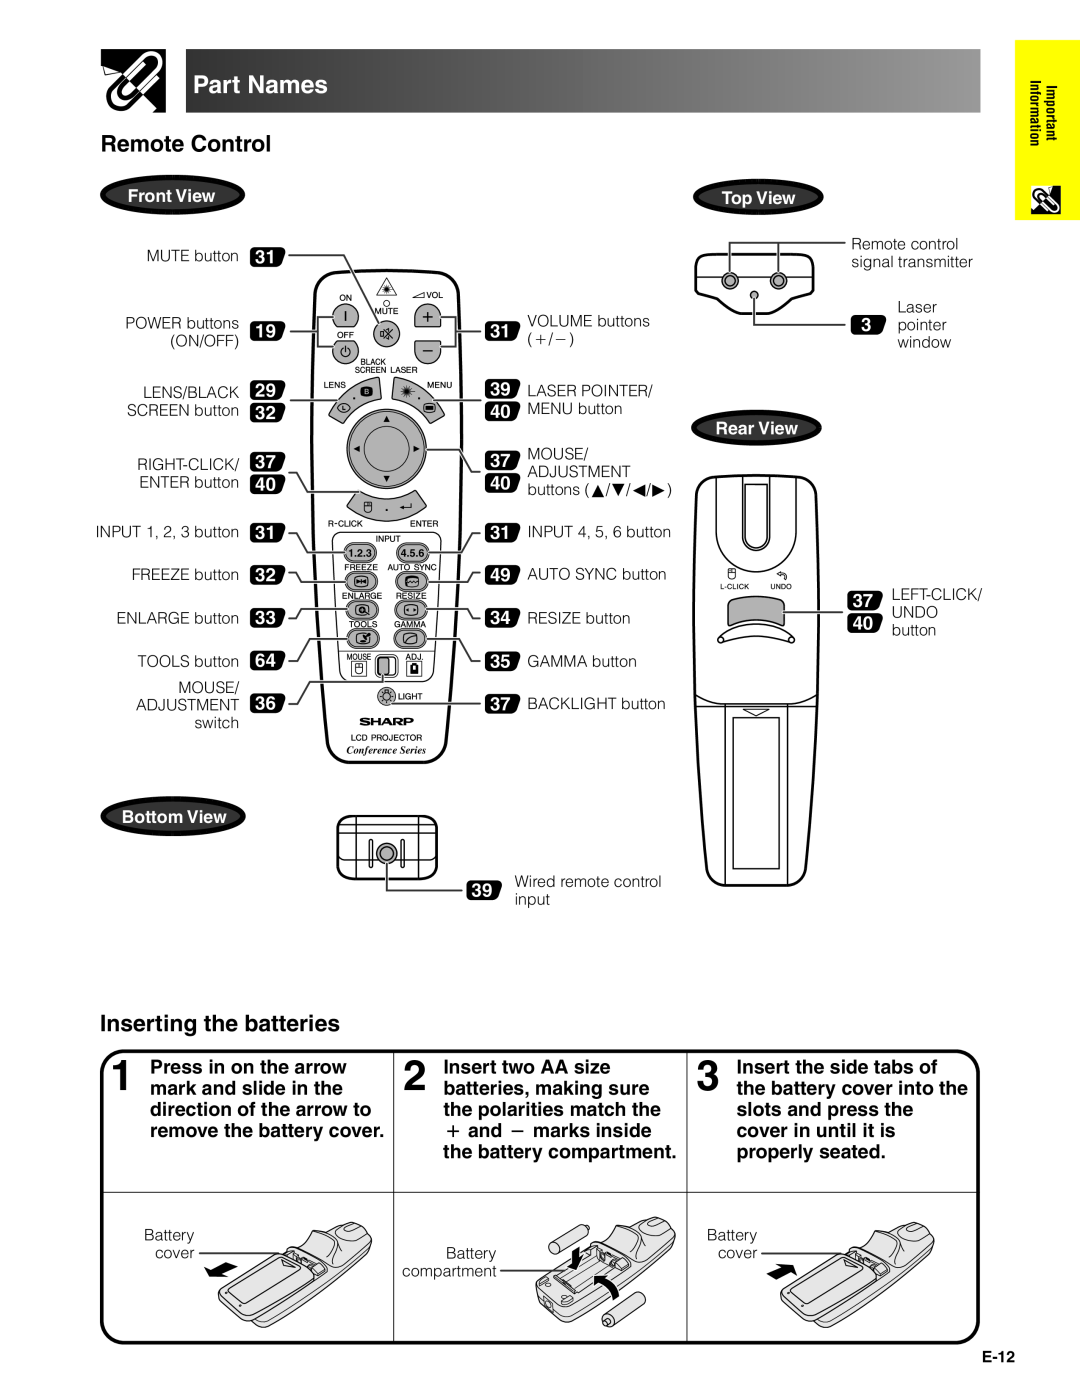 Sharp XG-V10XU Remote Control, Inserting the batteries, Part Names, Press in on the arrow, Insert two AA size 